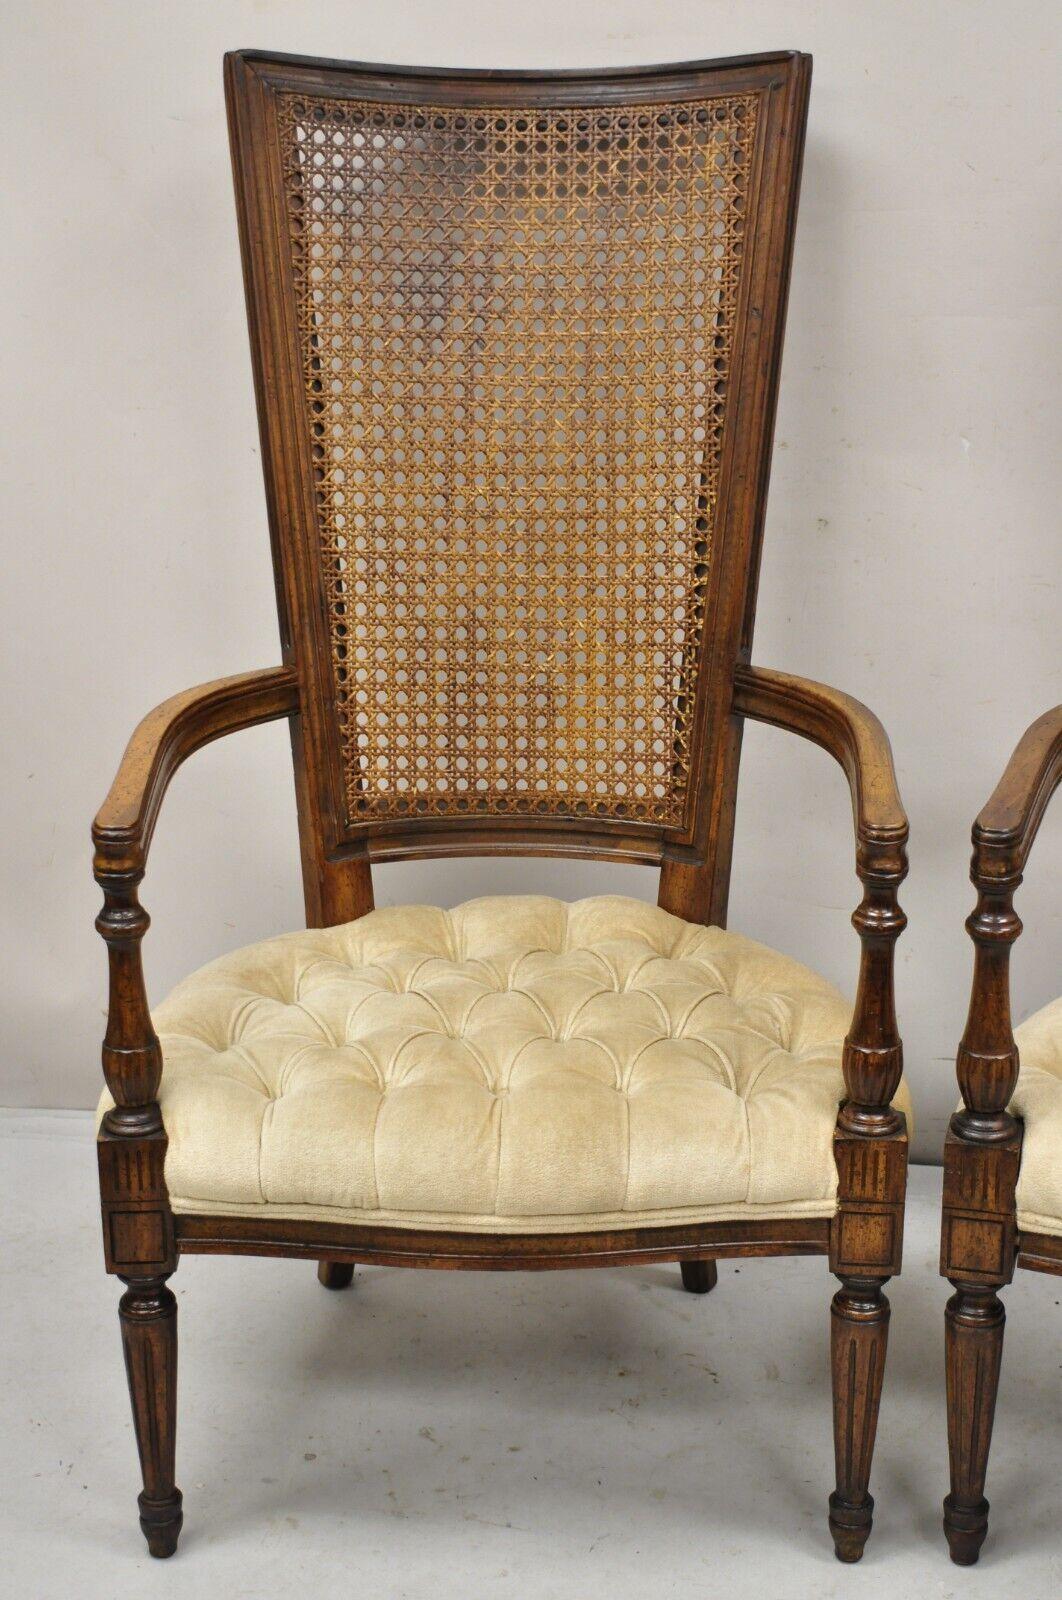 Caning Vintage Hollywood Regency Tall Cane Back Fireside Lounge Armchairs - a Pair For Sale